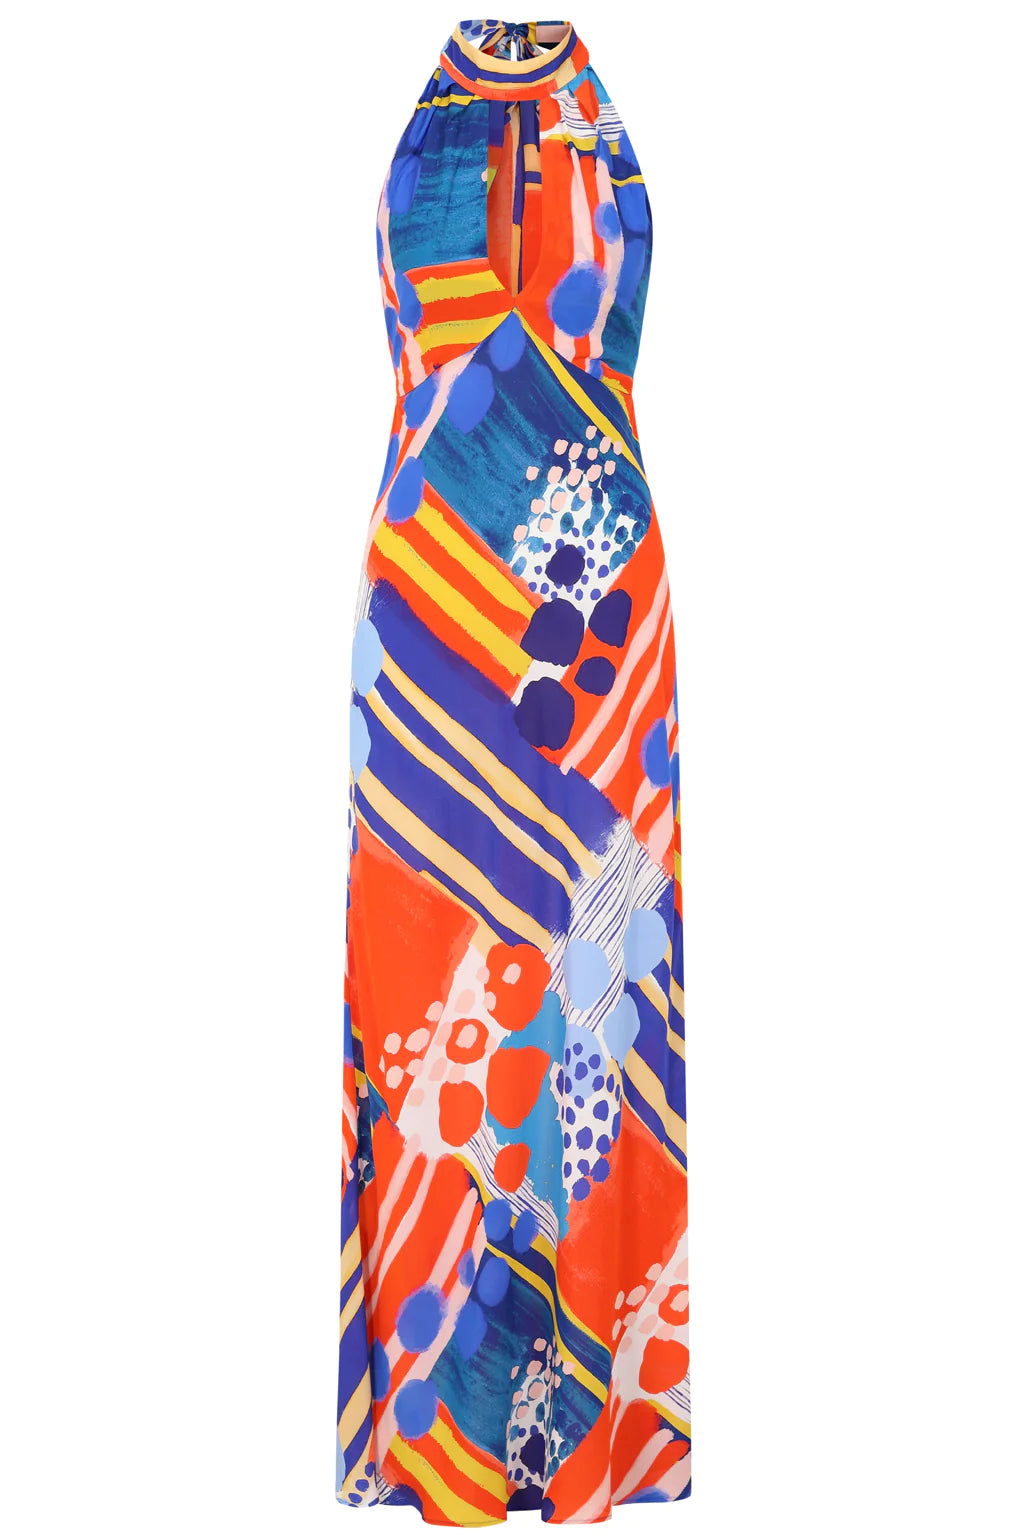 Halterneck maxi dress in orange blue and yellows with straight skirt